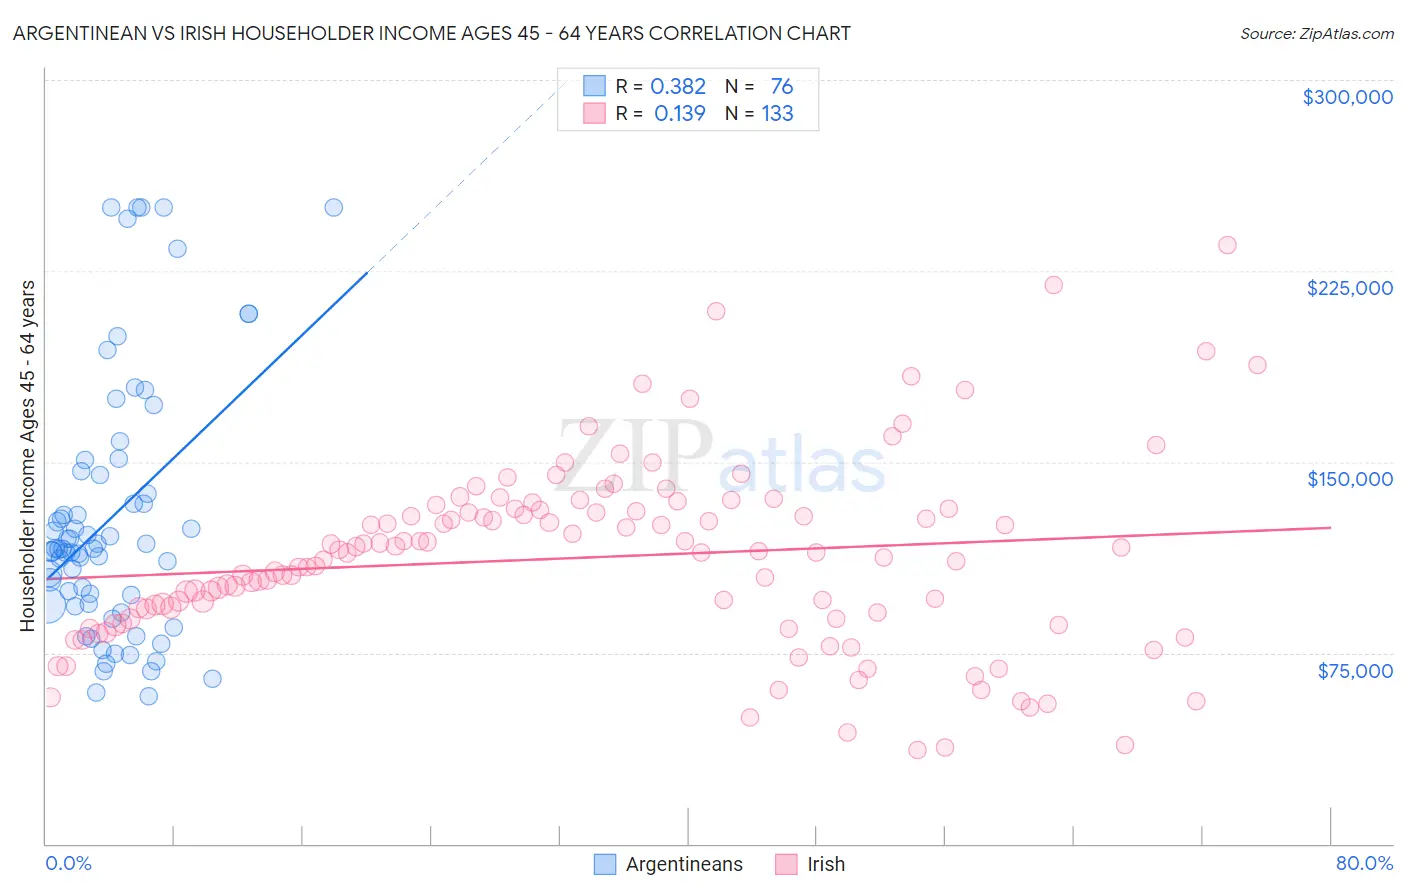 Argentinean vs Irish Householder Income Ages 45 - 64 years